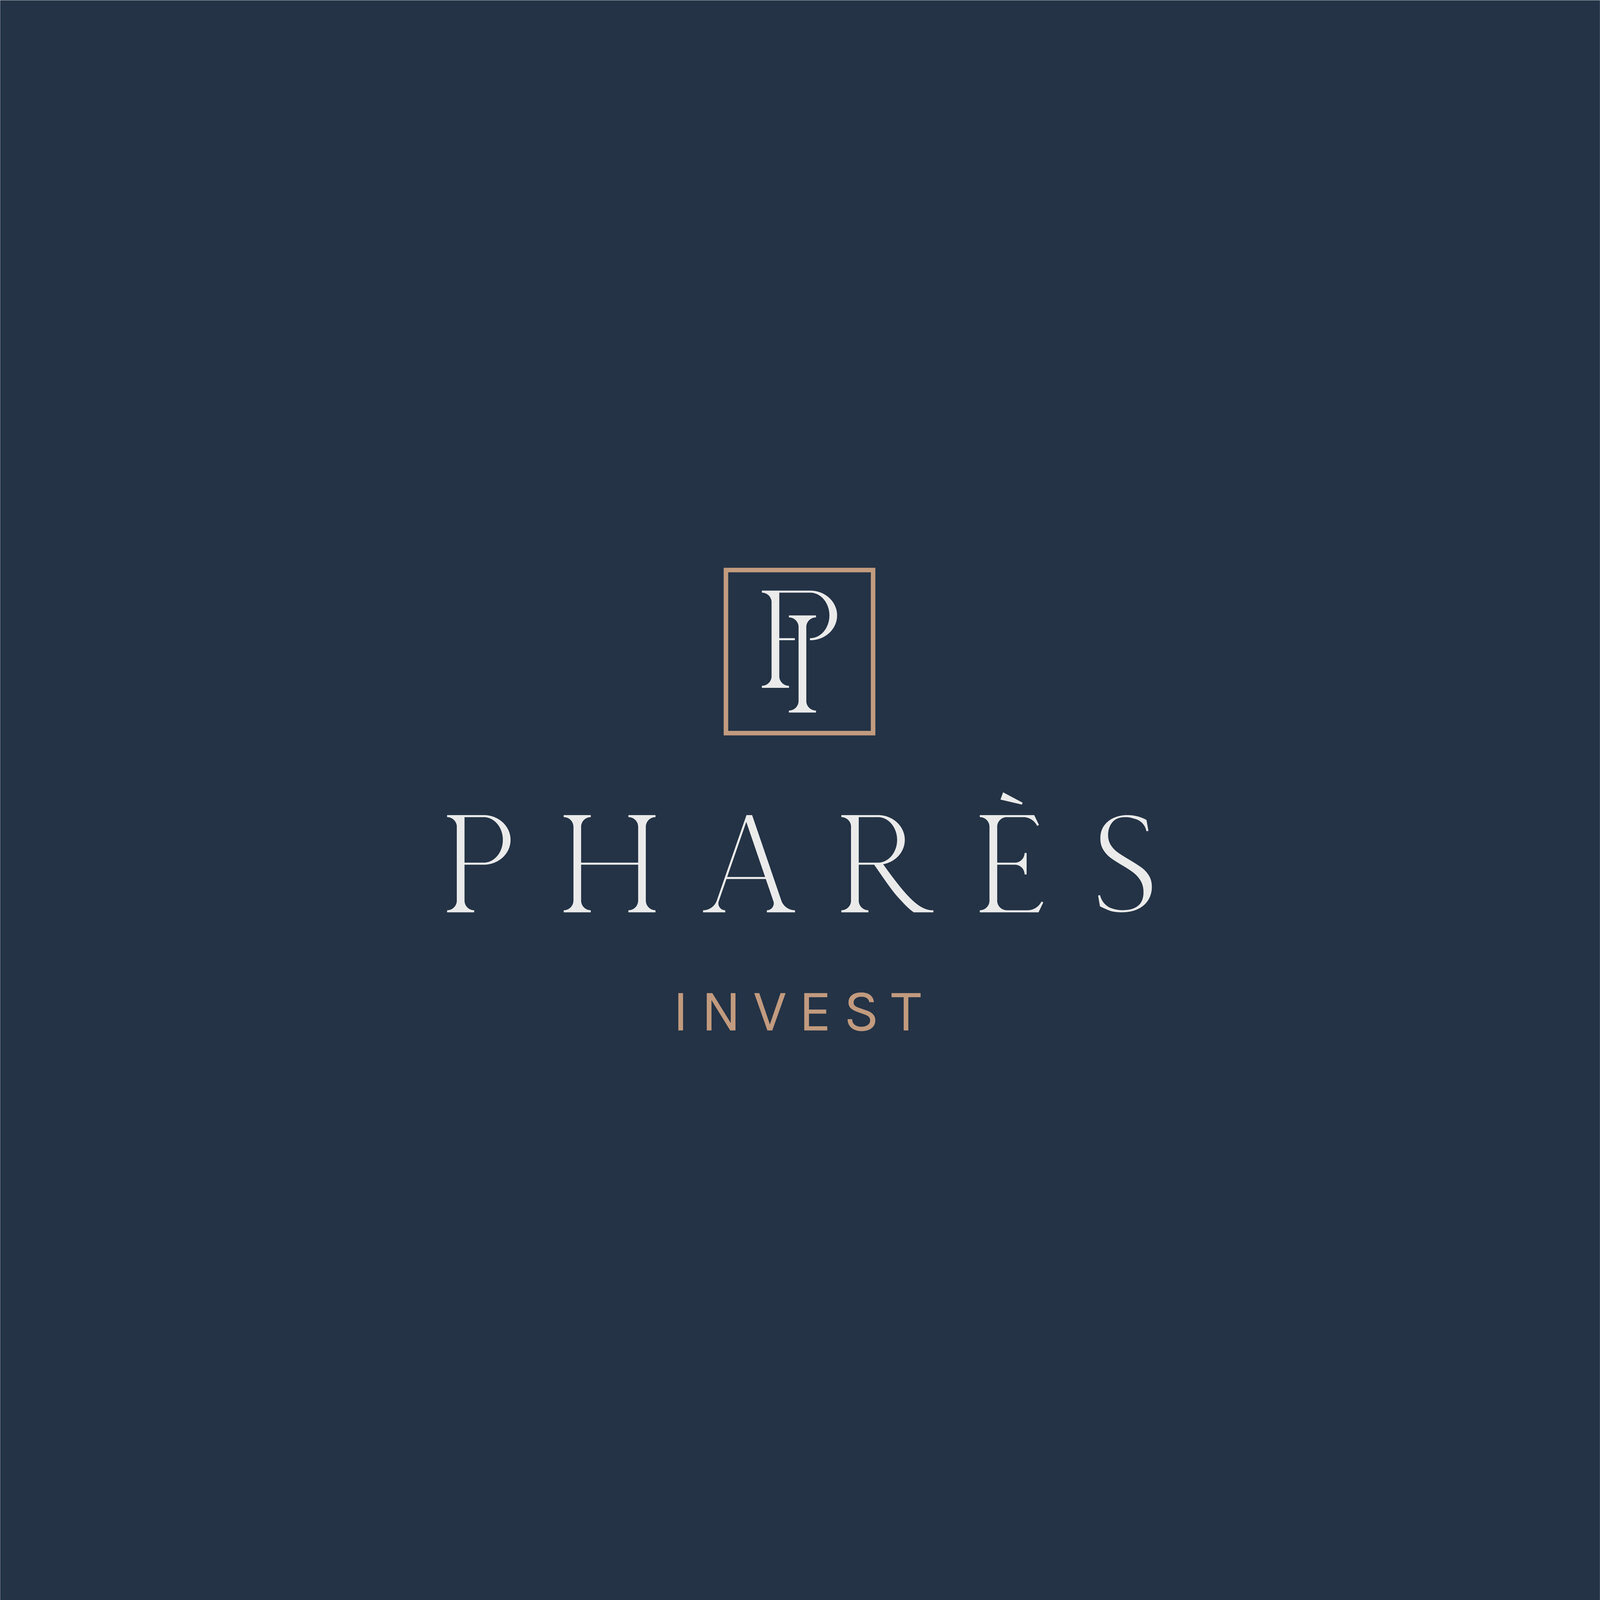 Persona-Vera-branding-agency-for-ambitious-leaders-personal-branding-Phares-Invest-LOGO-4